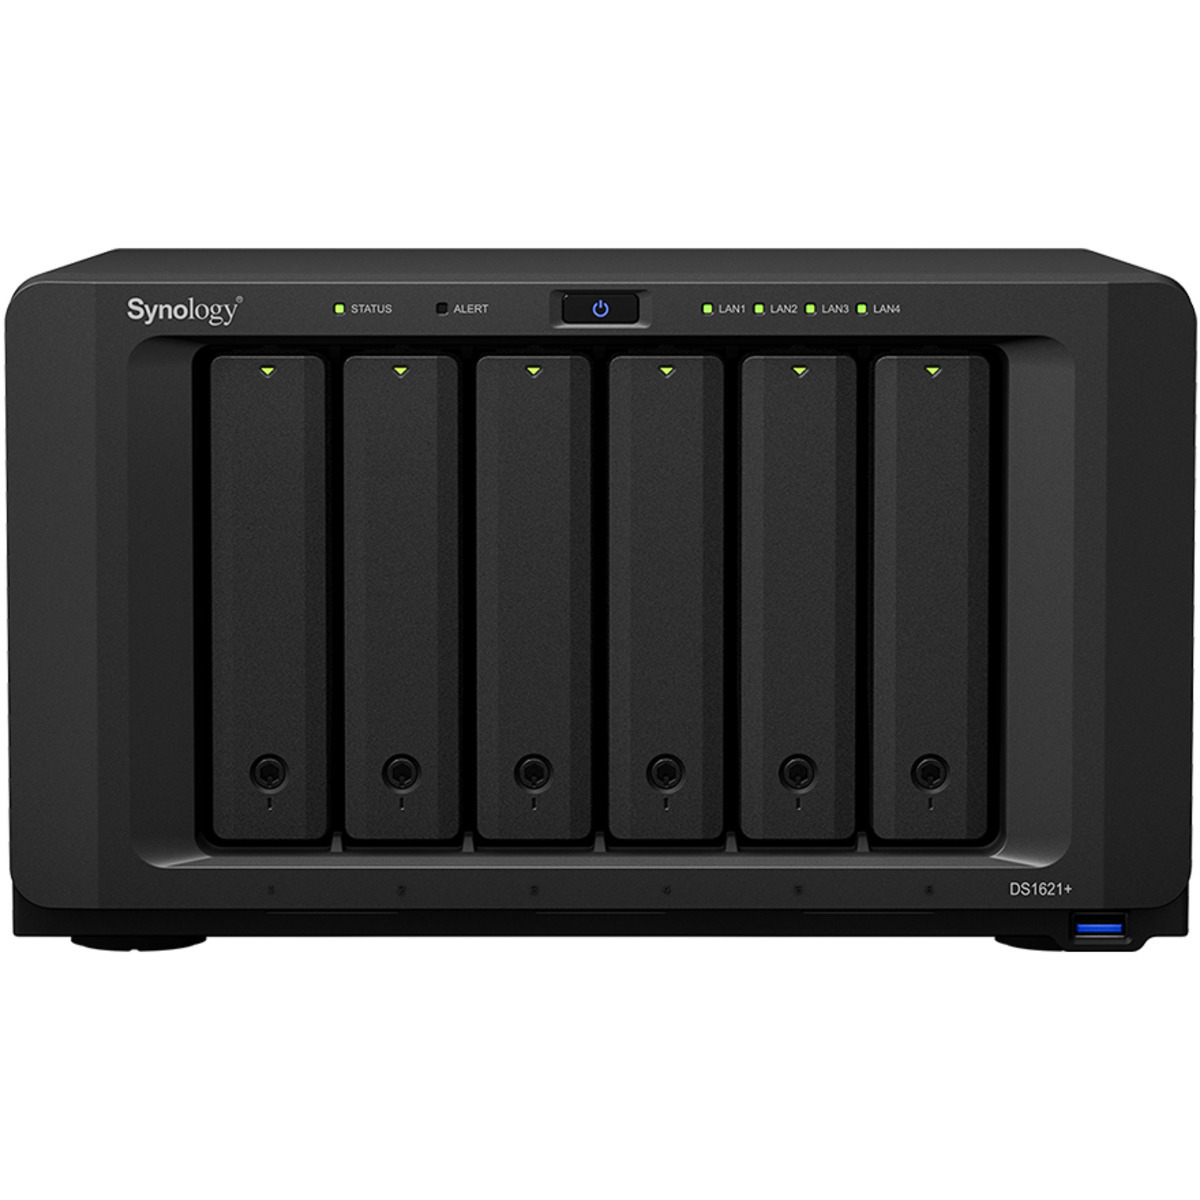 Synology DiskStation DS1621+ 24tb 6-Bay Desktop Multimedia / Power User / Business NAS - Network Attached Storage Device 6x4tb Western Digital Red Plus WD40EFPX 3.5 5400rpm SATA 6Gb/s HDD NAS Class Drives Installed - Burn-In Tested - FREE RAM UPGRADE DiskStation DS1621+